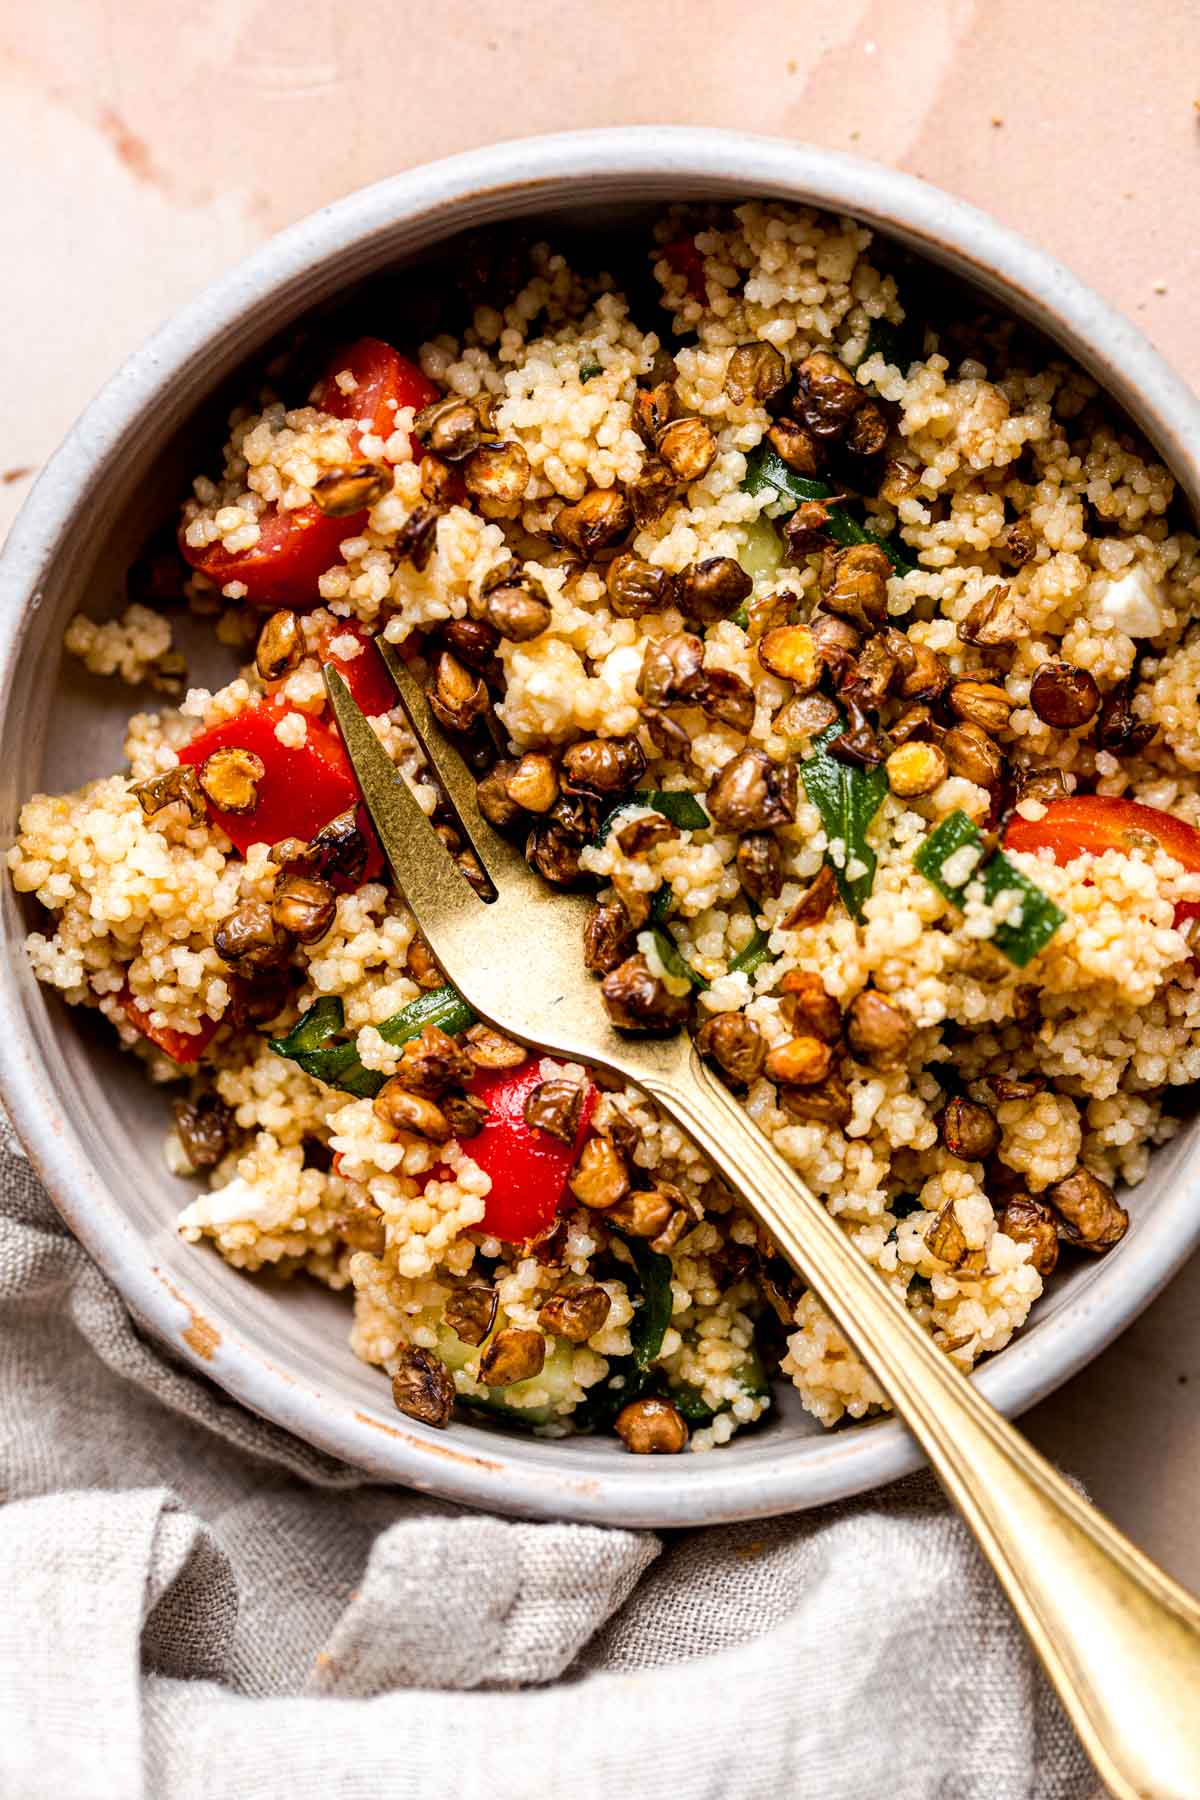 A bowl of vegetable couscous salad with a fork in the middle.